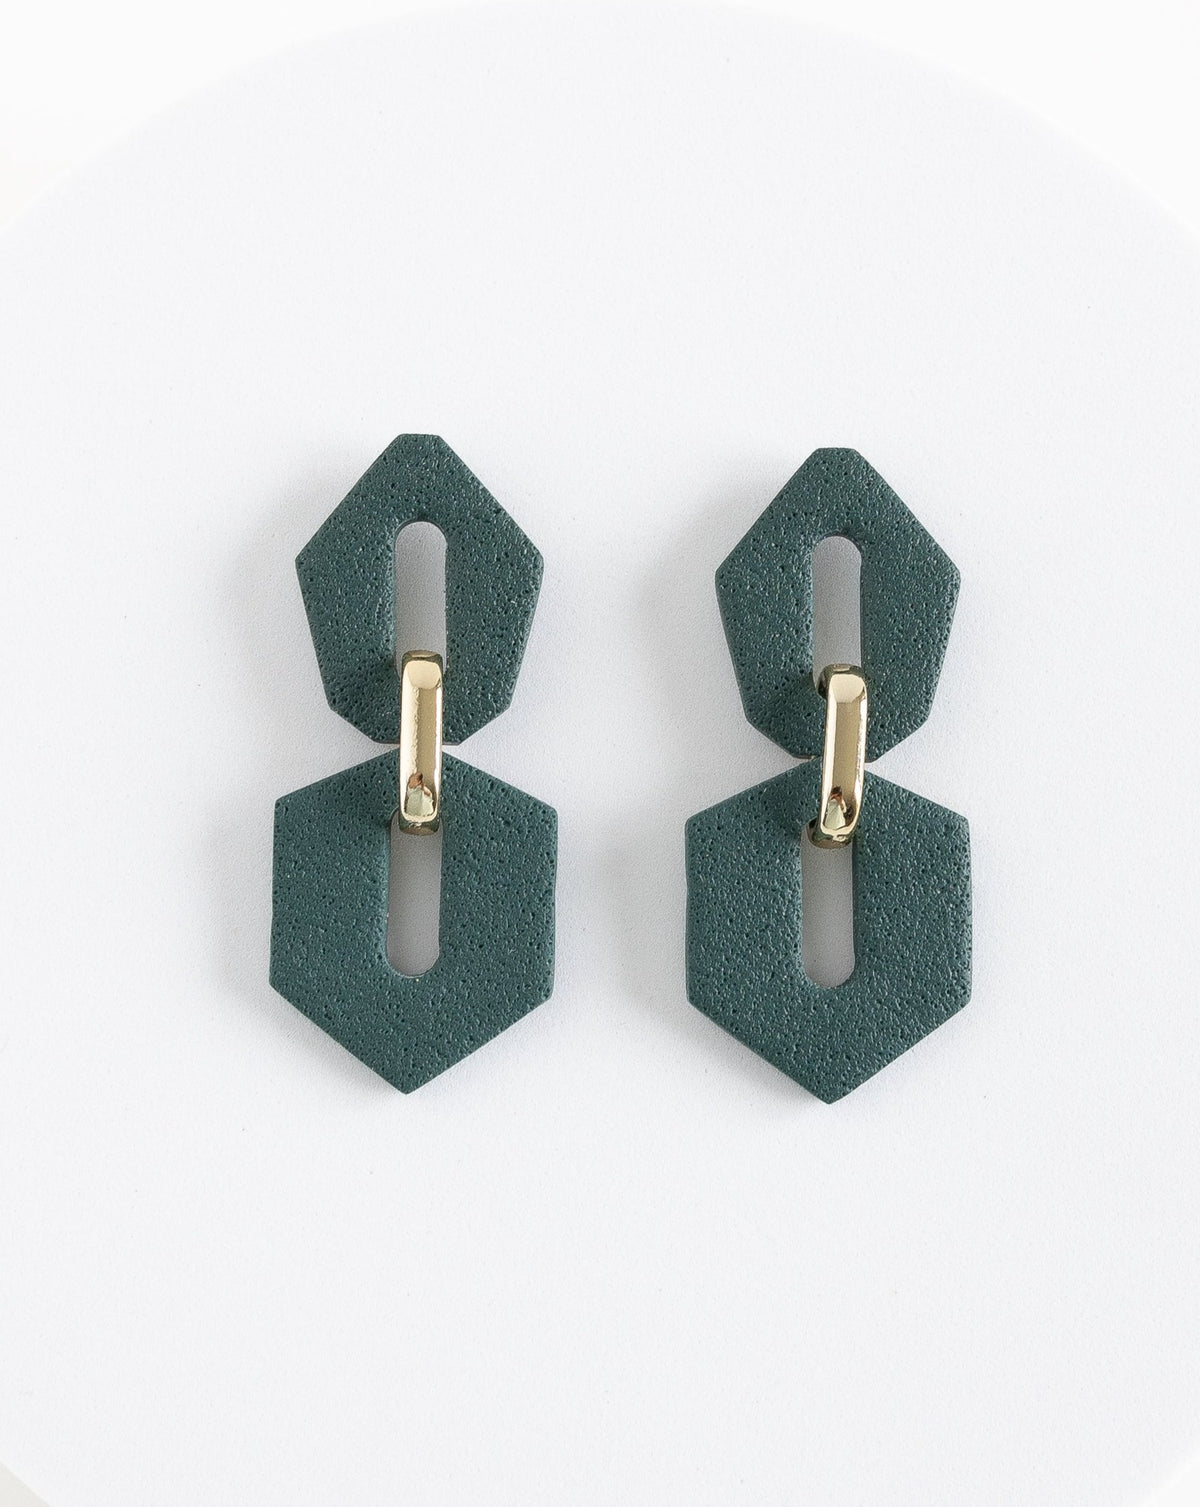 Front view of Shilla earrings in Pine color.